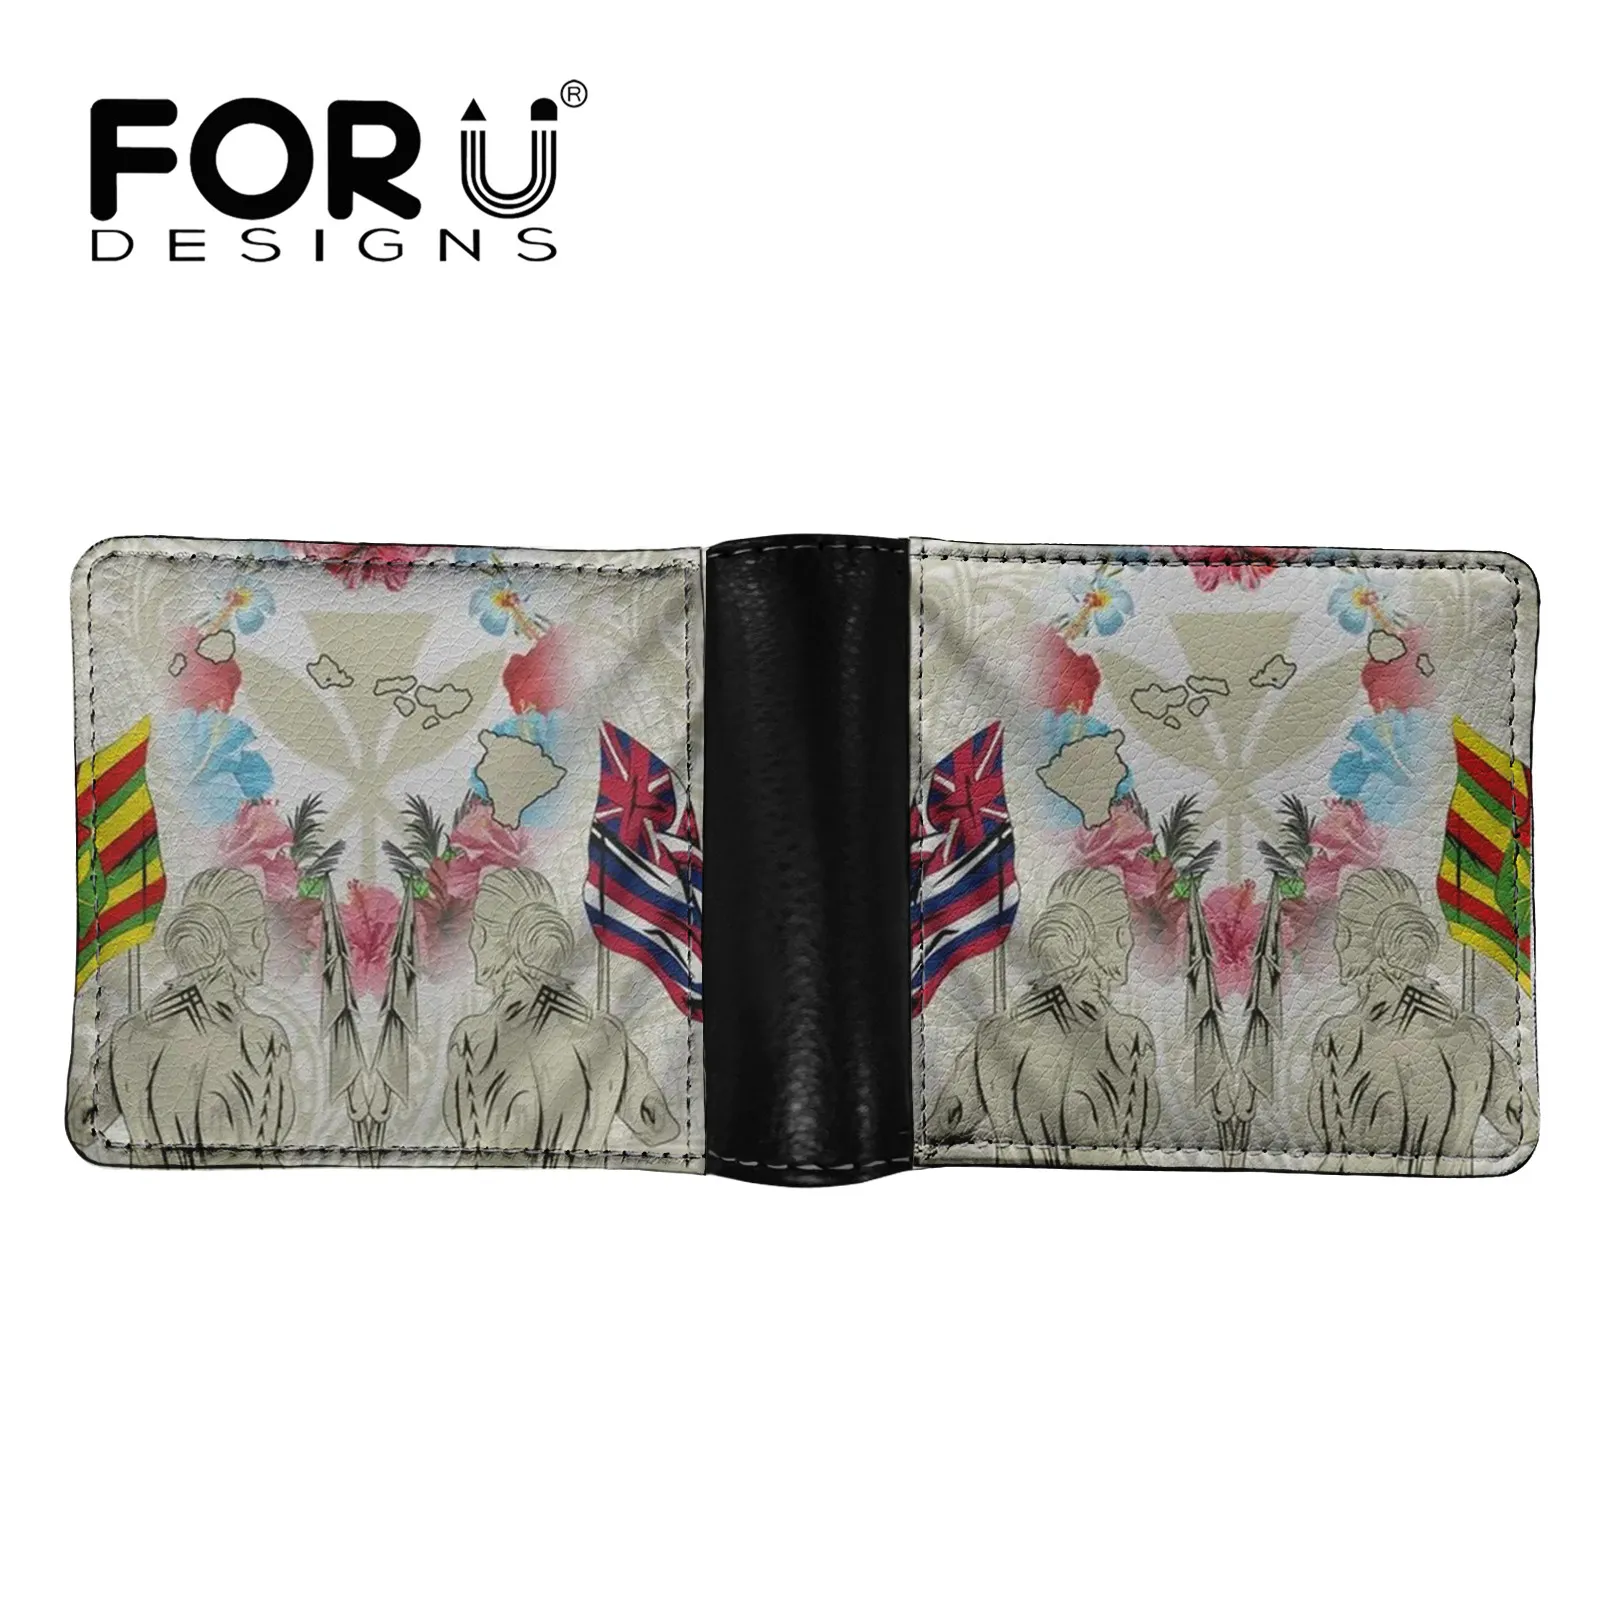 

FORUDESIGNS Tradition Hawaii Maoli Tribal Design Print Wallet Vintage Luxury Male Leather PU Purse Short Clip Wallet Momey Bags